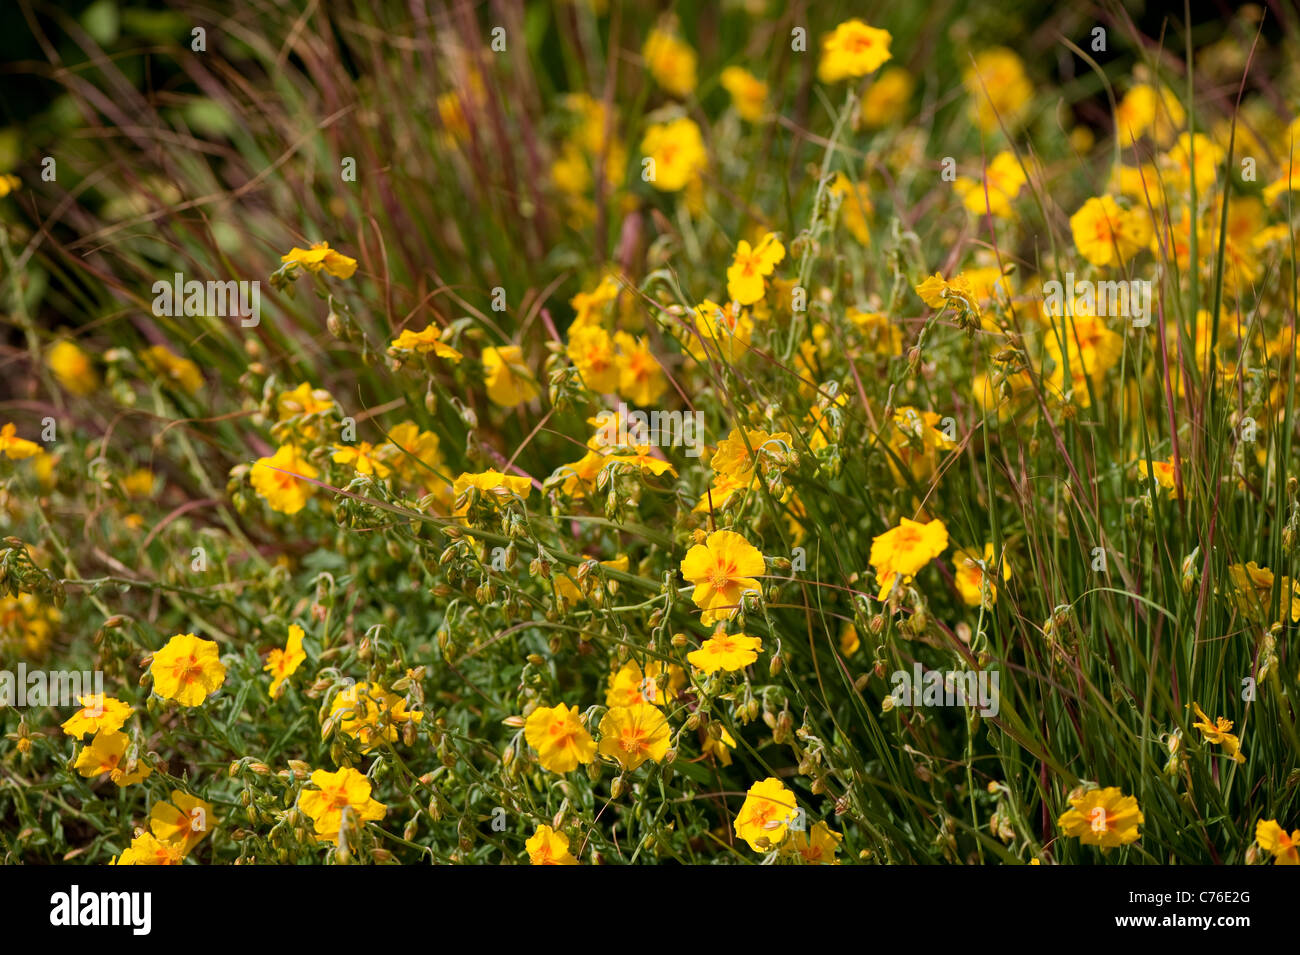 Helianthemum ‘Butter and Eggs’, Rock Rose, in flower Stock Photo